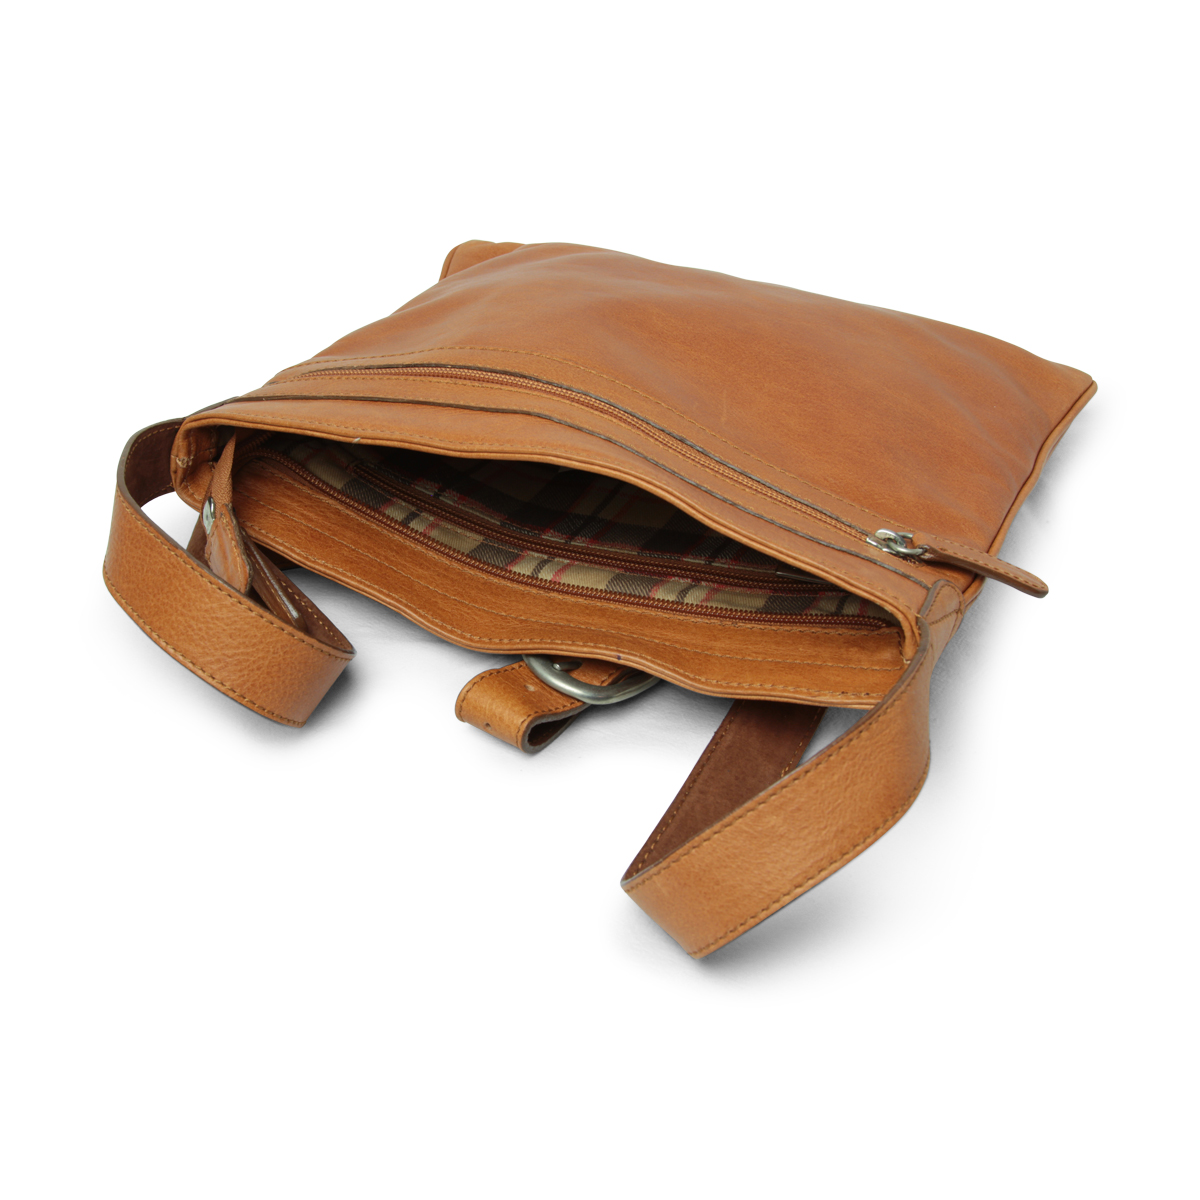 Leather cross body bag - colonial|069789CO|Old Angler Firenze